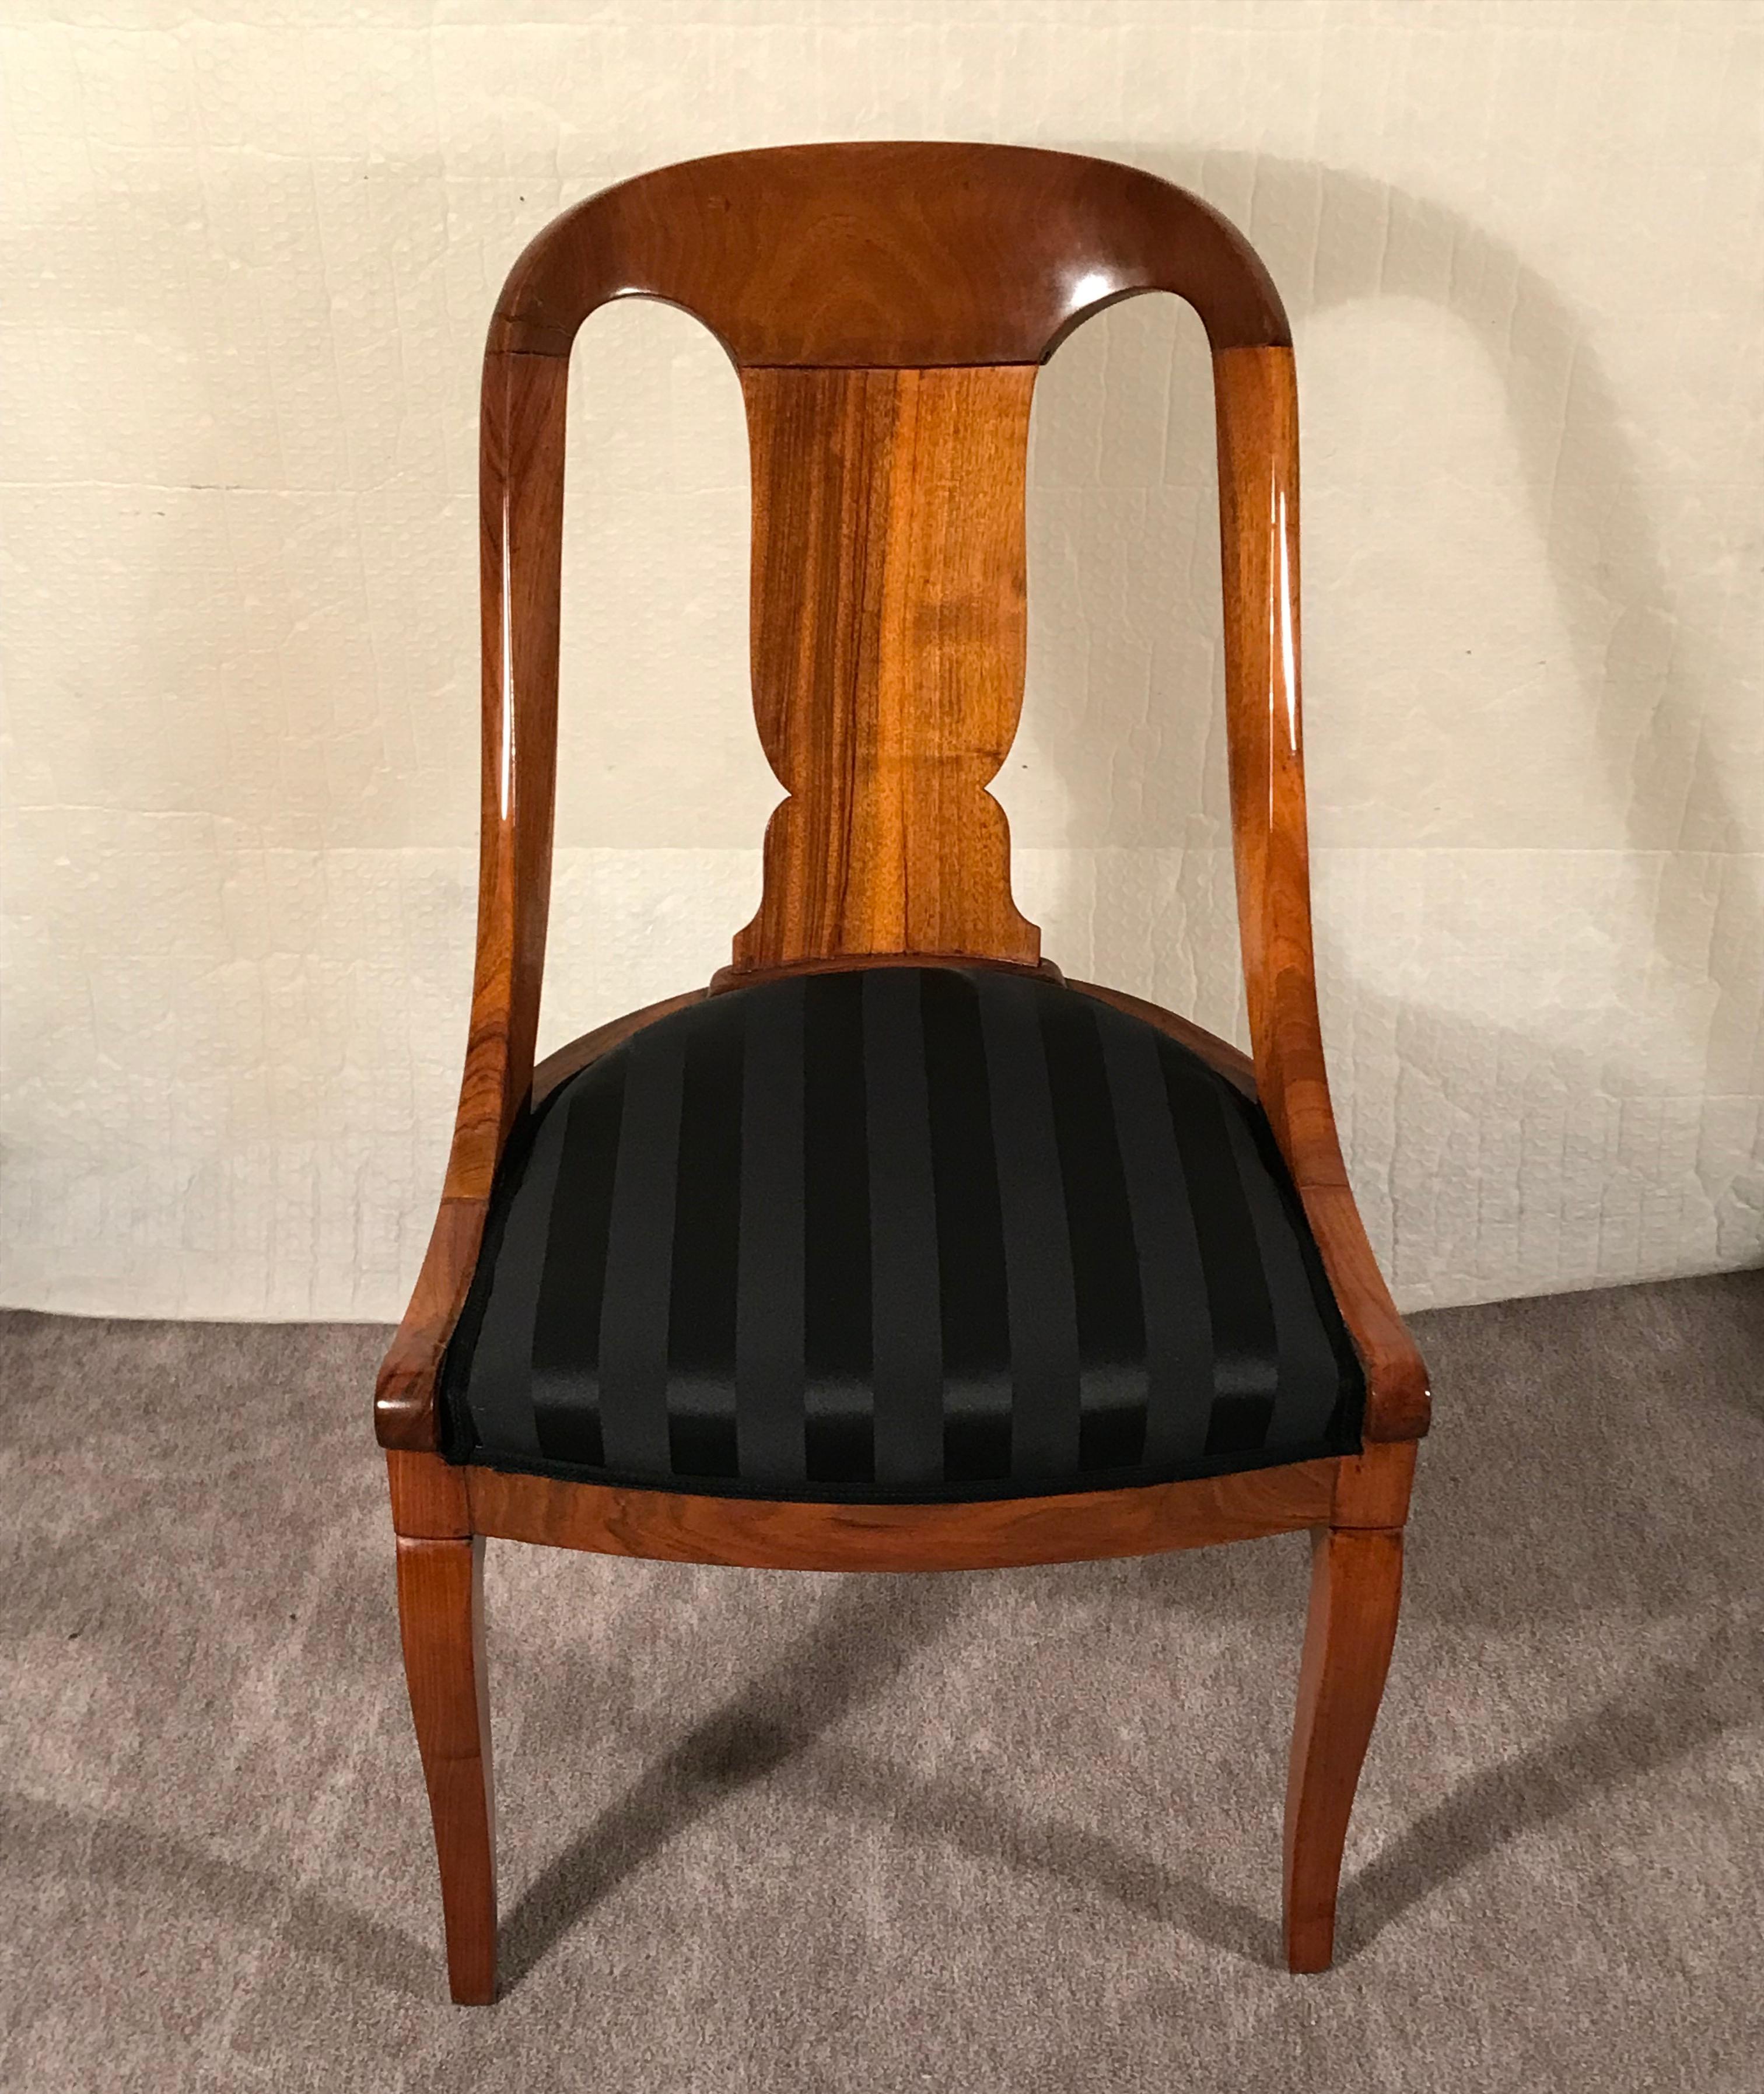 This set of 4 Empire Barrel chairs dates back to around 1810-20. They come from France. The chairs have a very pretty walnut veneer. They have a very elegant design with an open work back. The chairs are in very good refinished condition. They have